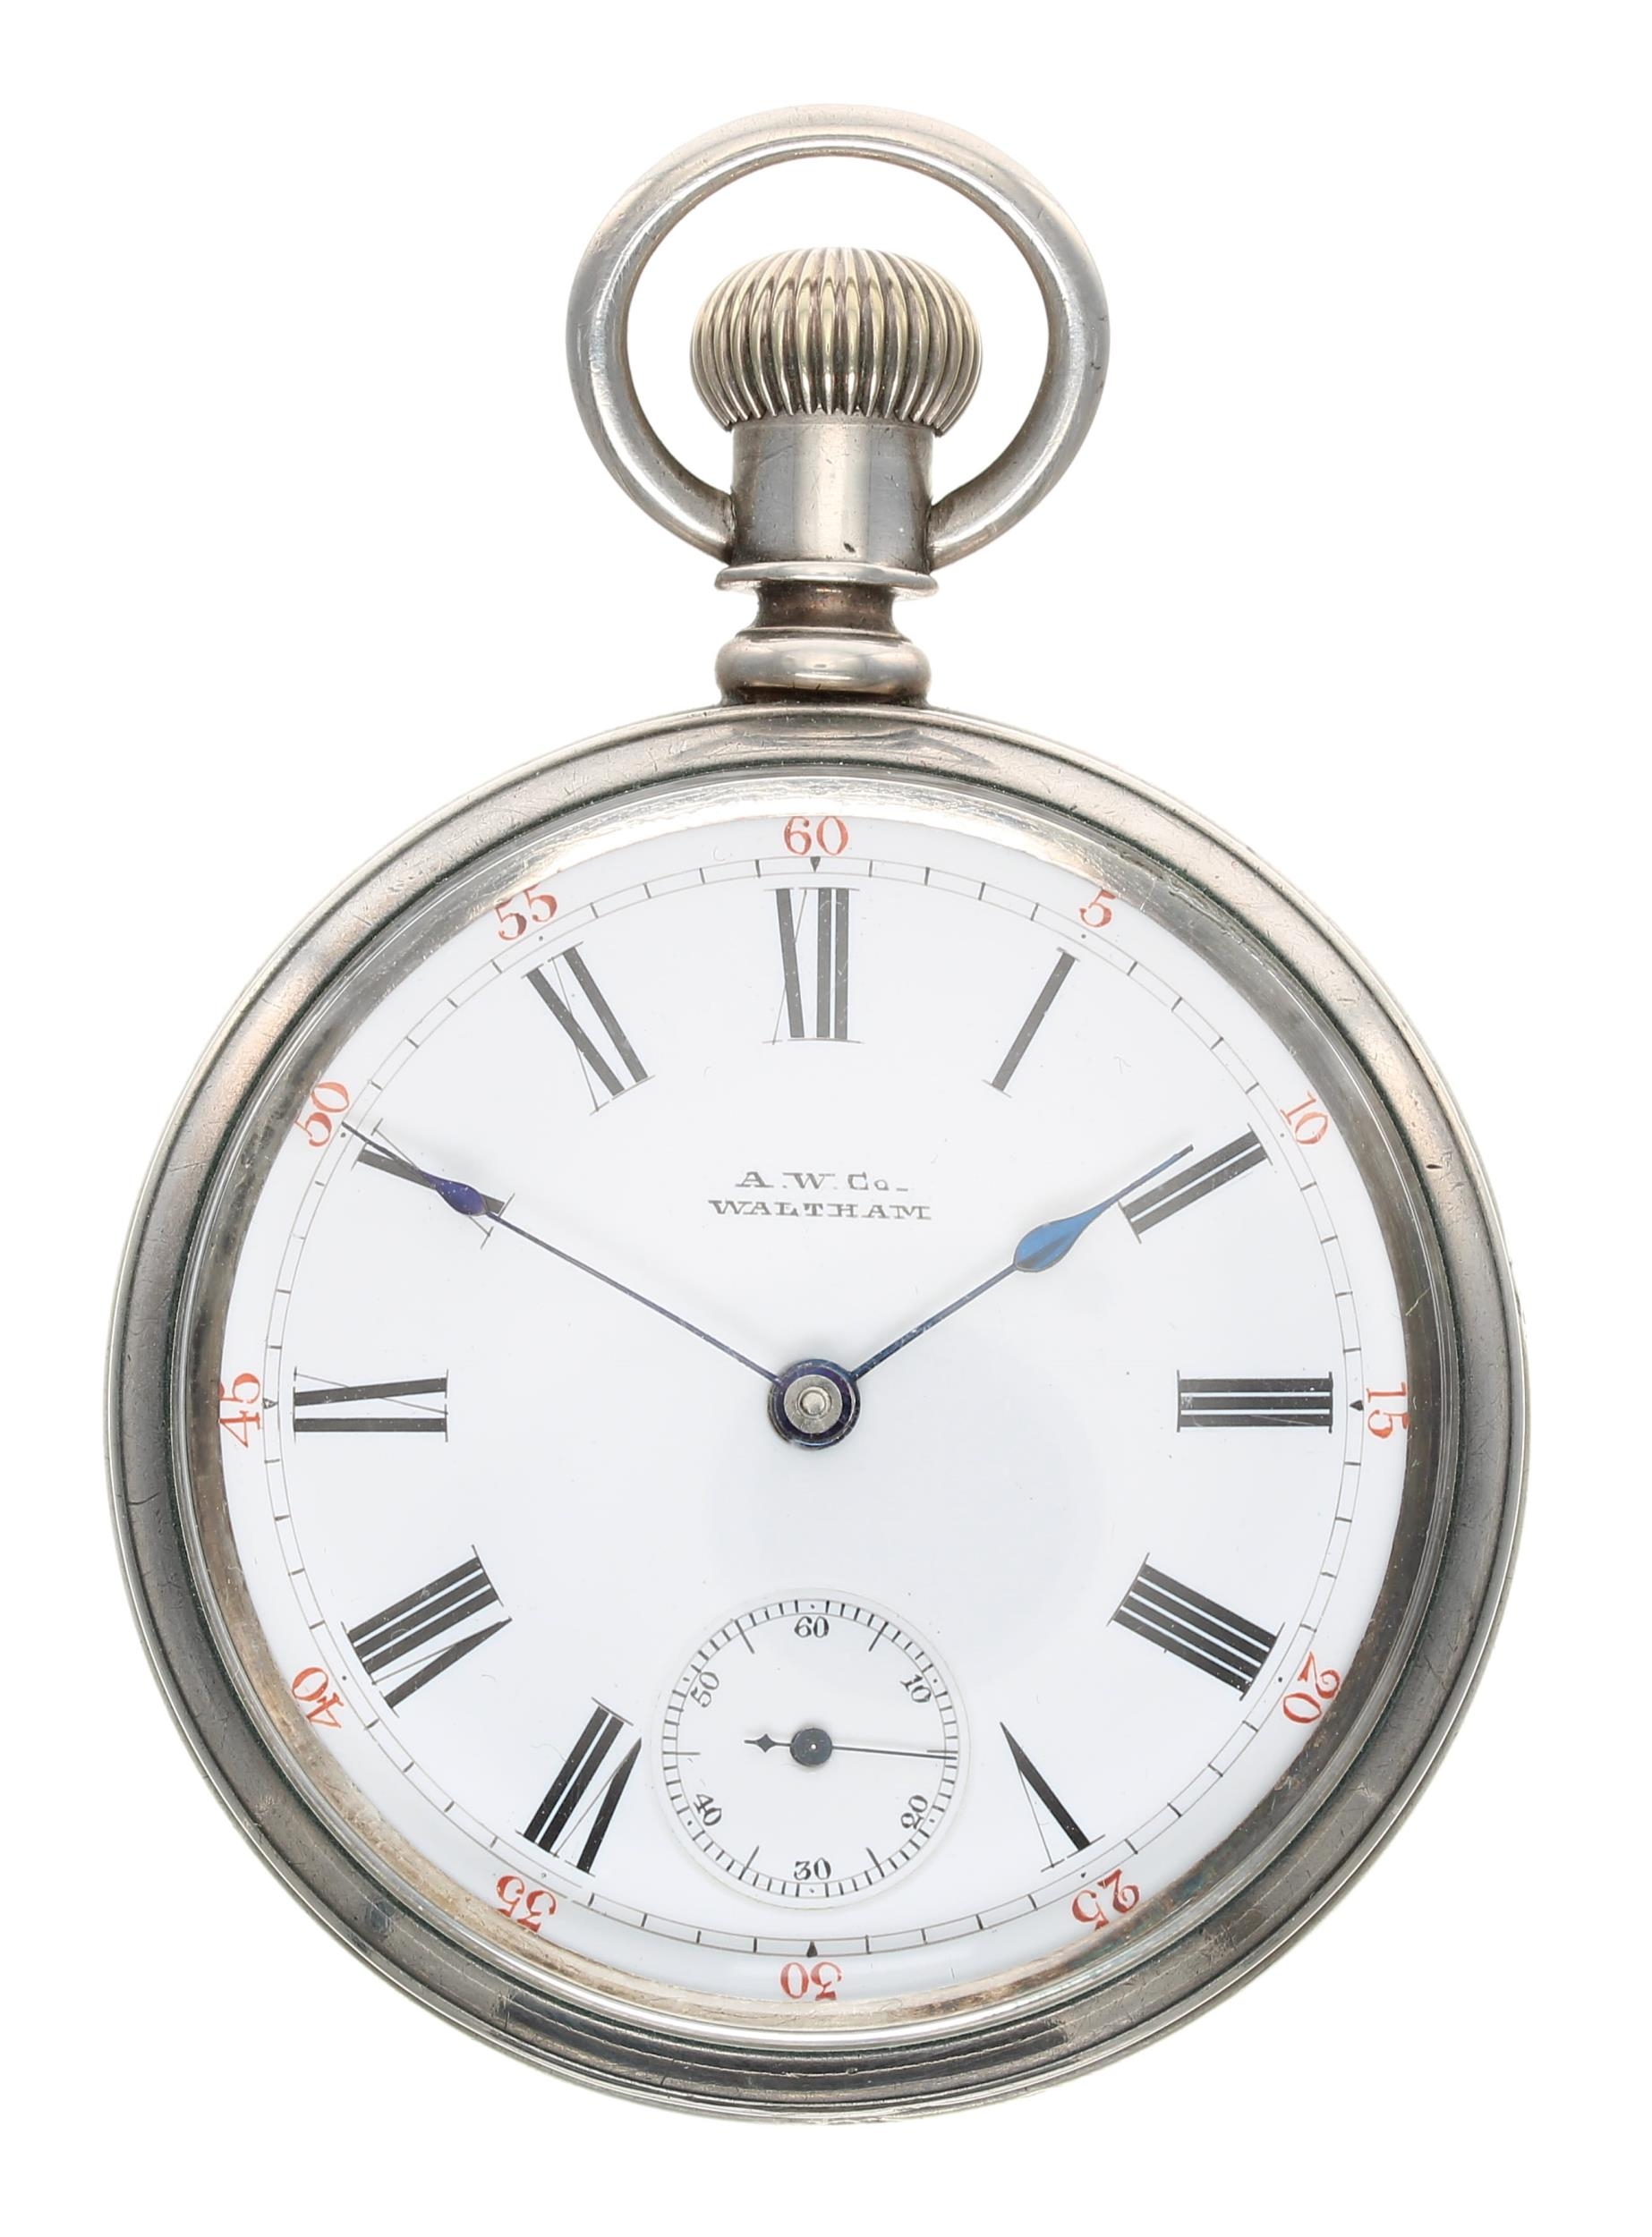 American Waltham nickel cased lever pocket watch, signed movement, no. 3893949, with safety